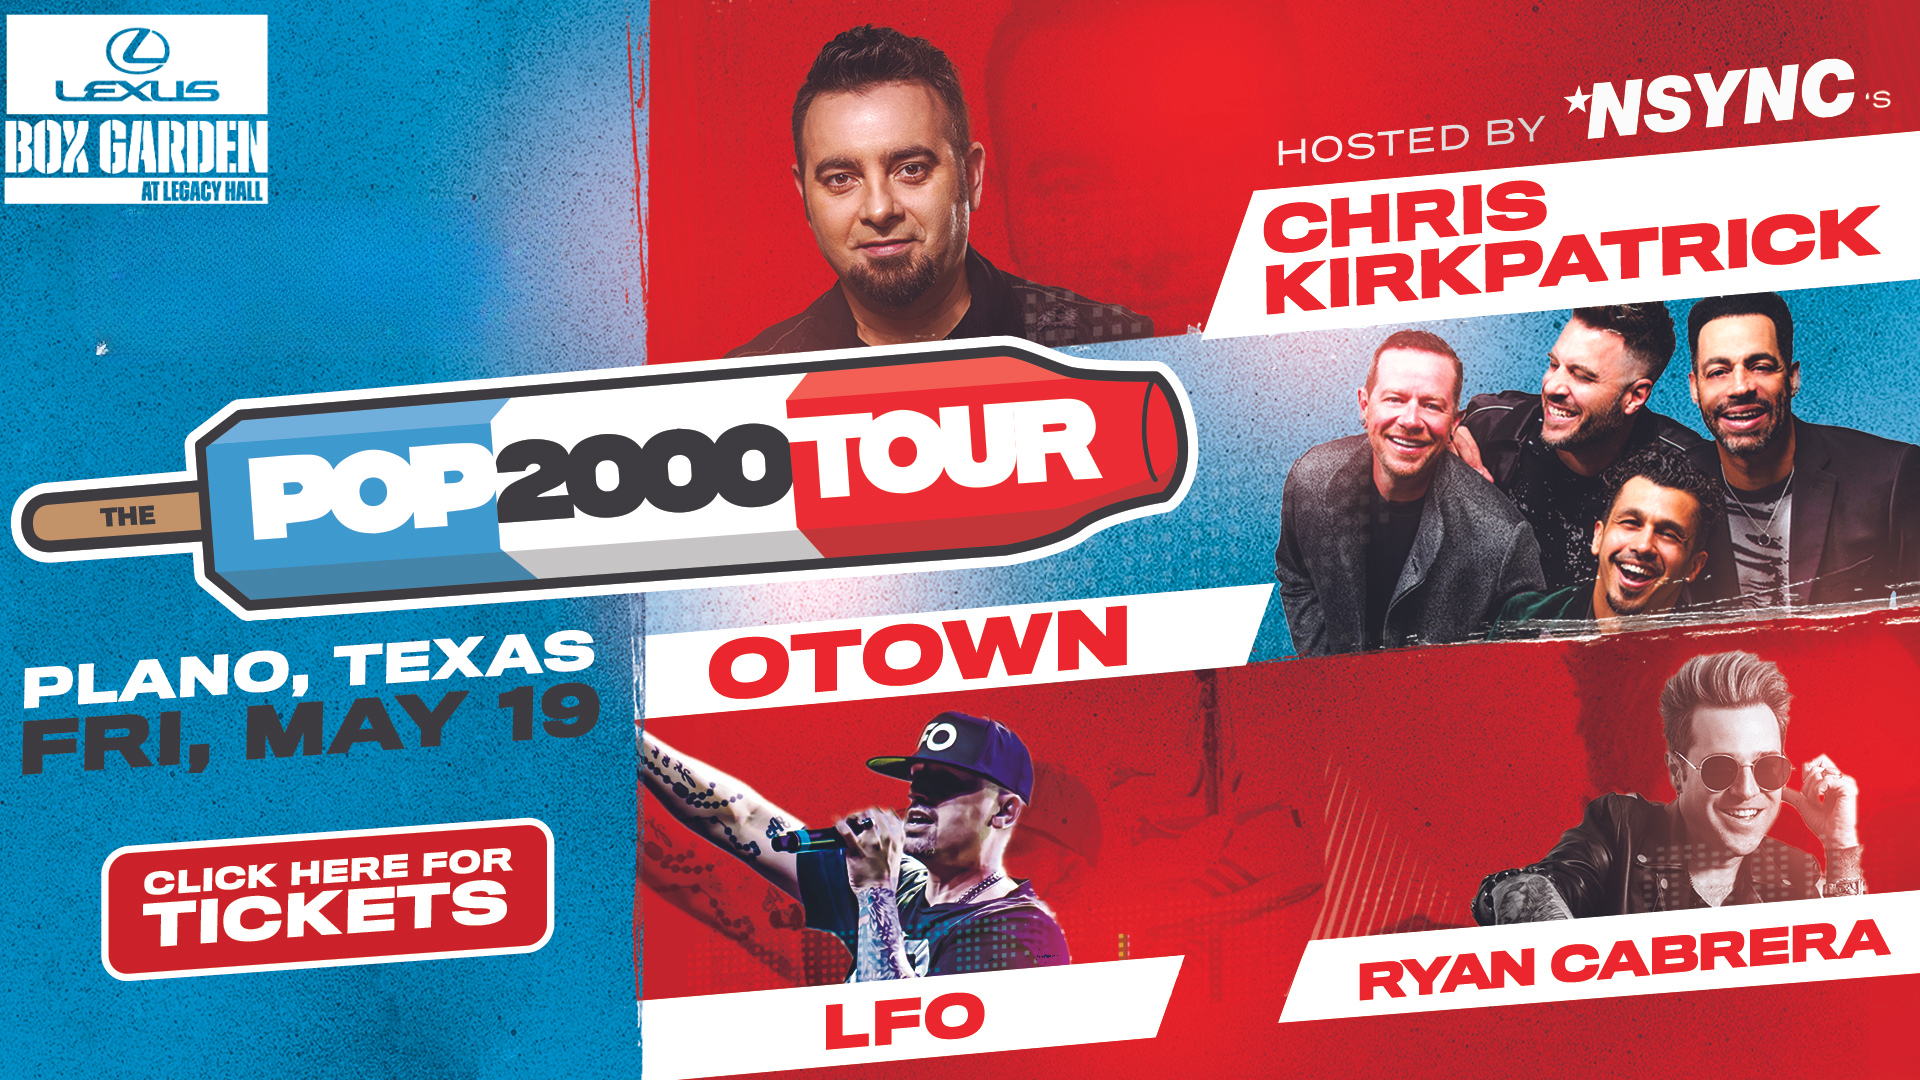 POP 2000 Tour hosted by NSYNC’s Chris Kirkpatrick with O-Town, LFO, & Ryan Cabrera - hero